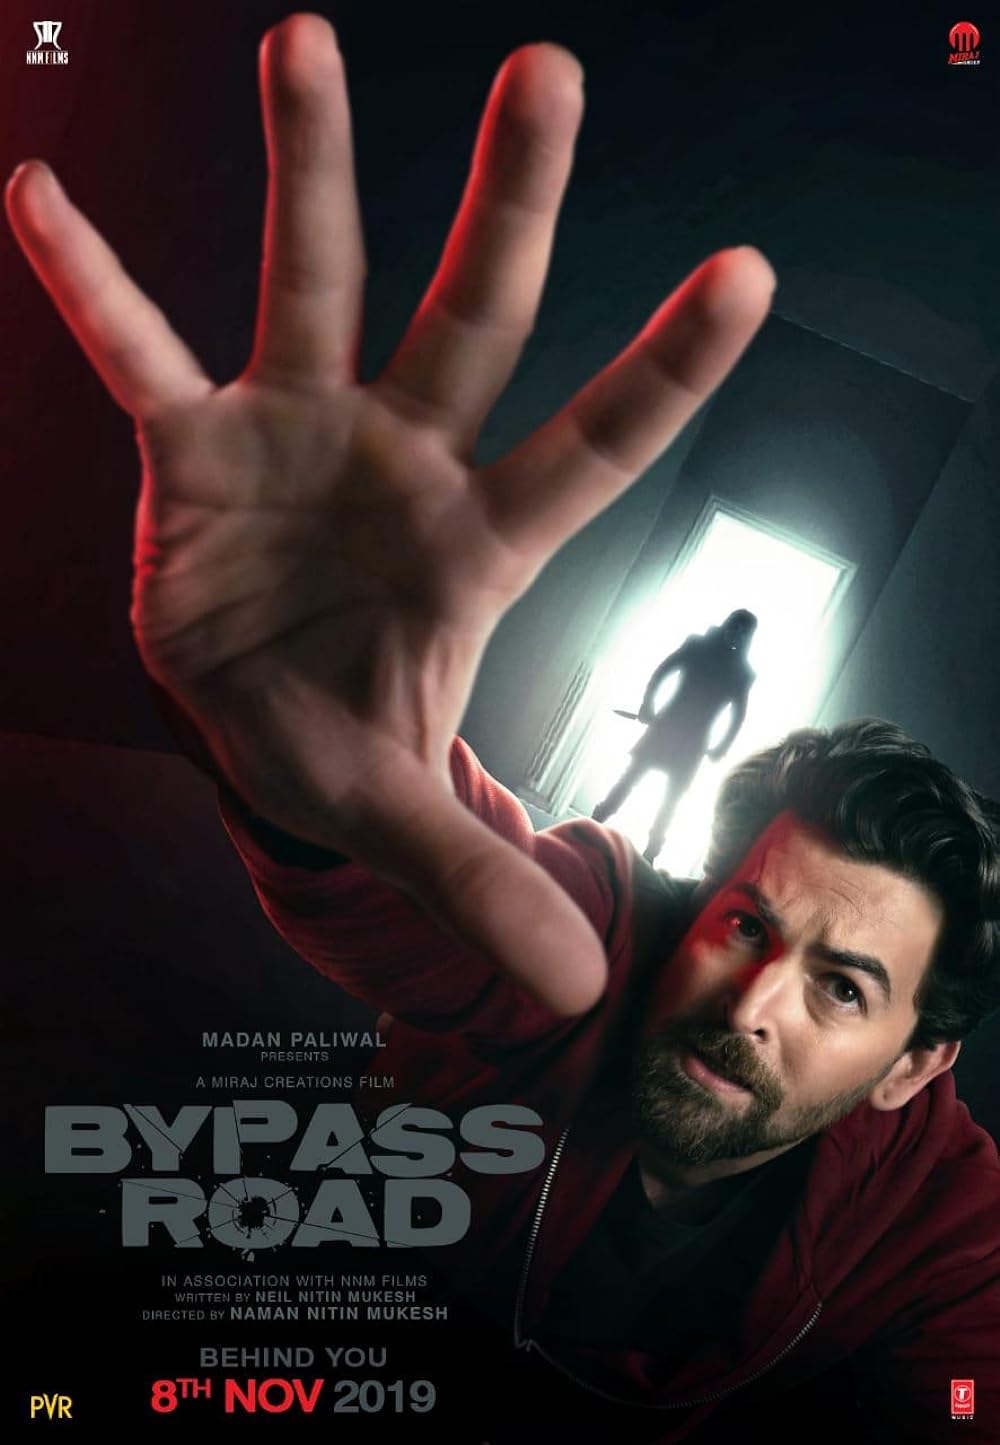 Download Bypass Road (2019) Hindi Movie Web-DL || 480p [400MB] || 720p [1.2GB] || 1080p [2.1GB]